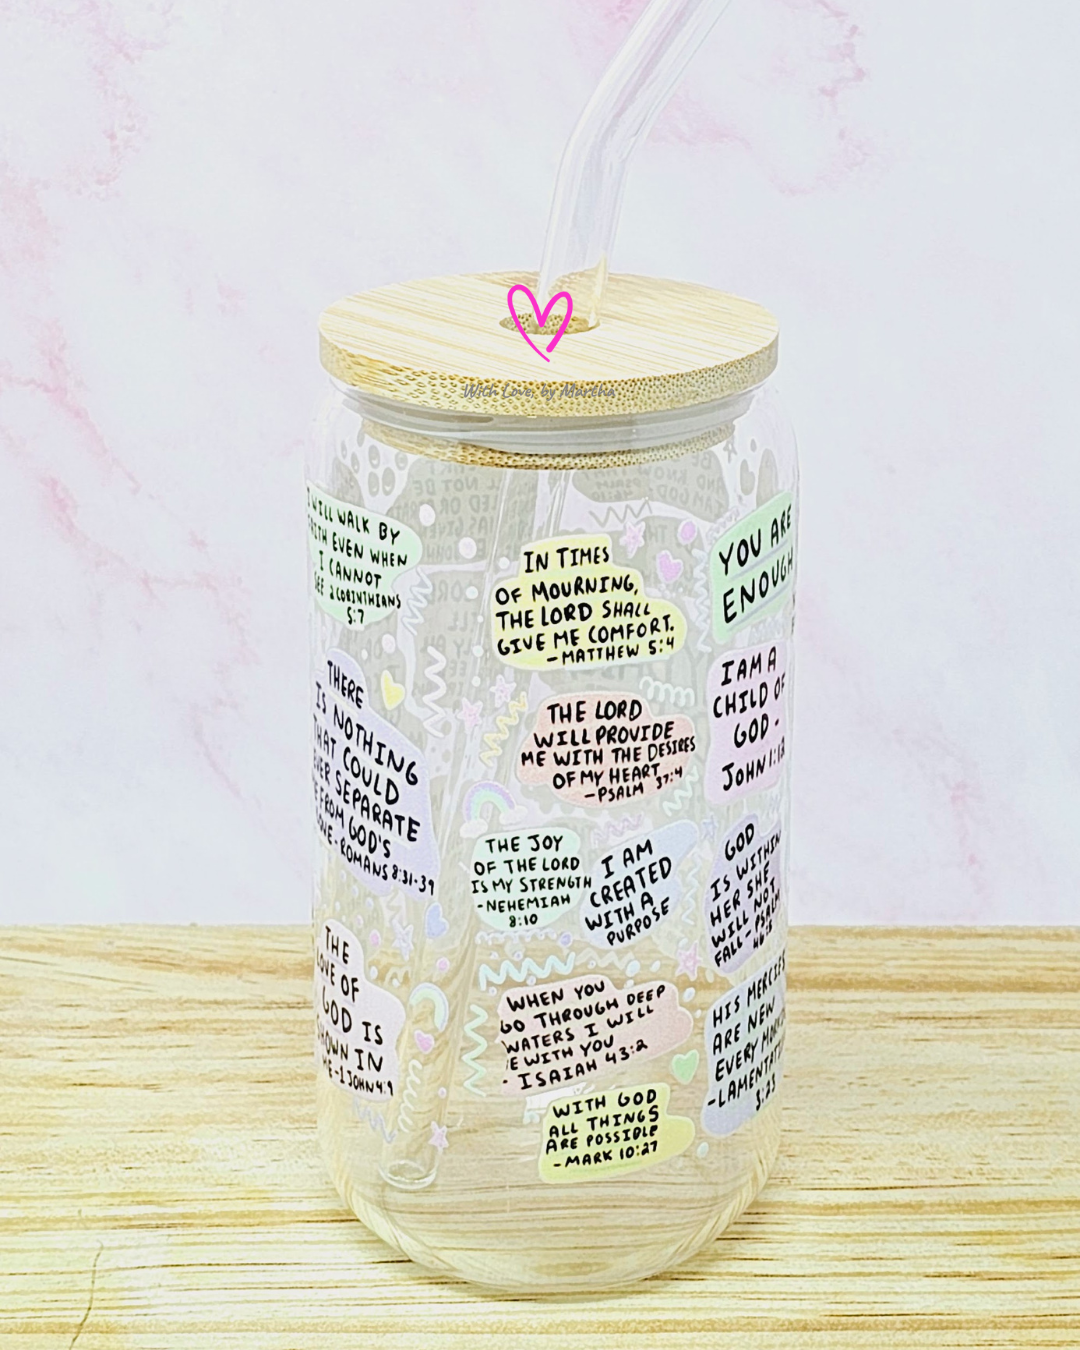 "My daily bible affirmations" Glass cup 16oz